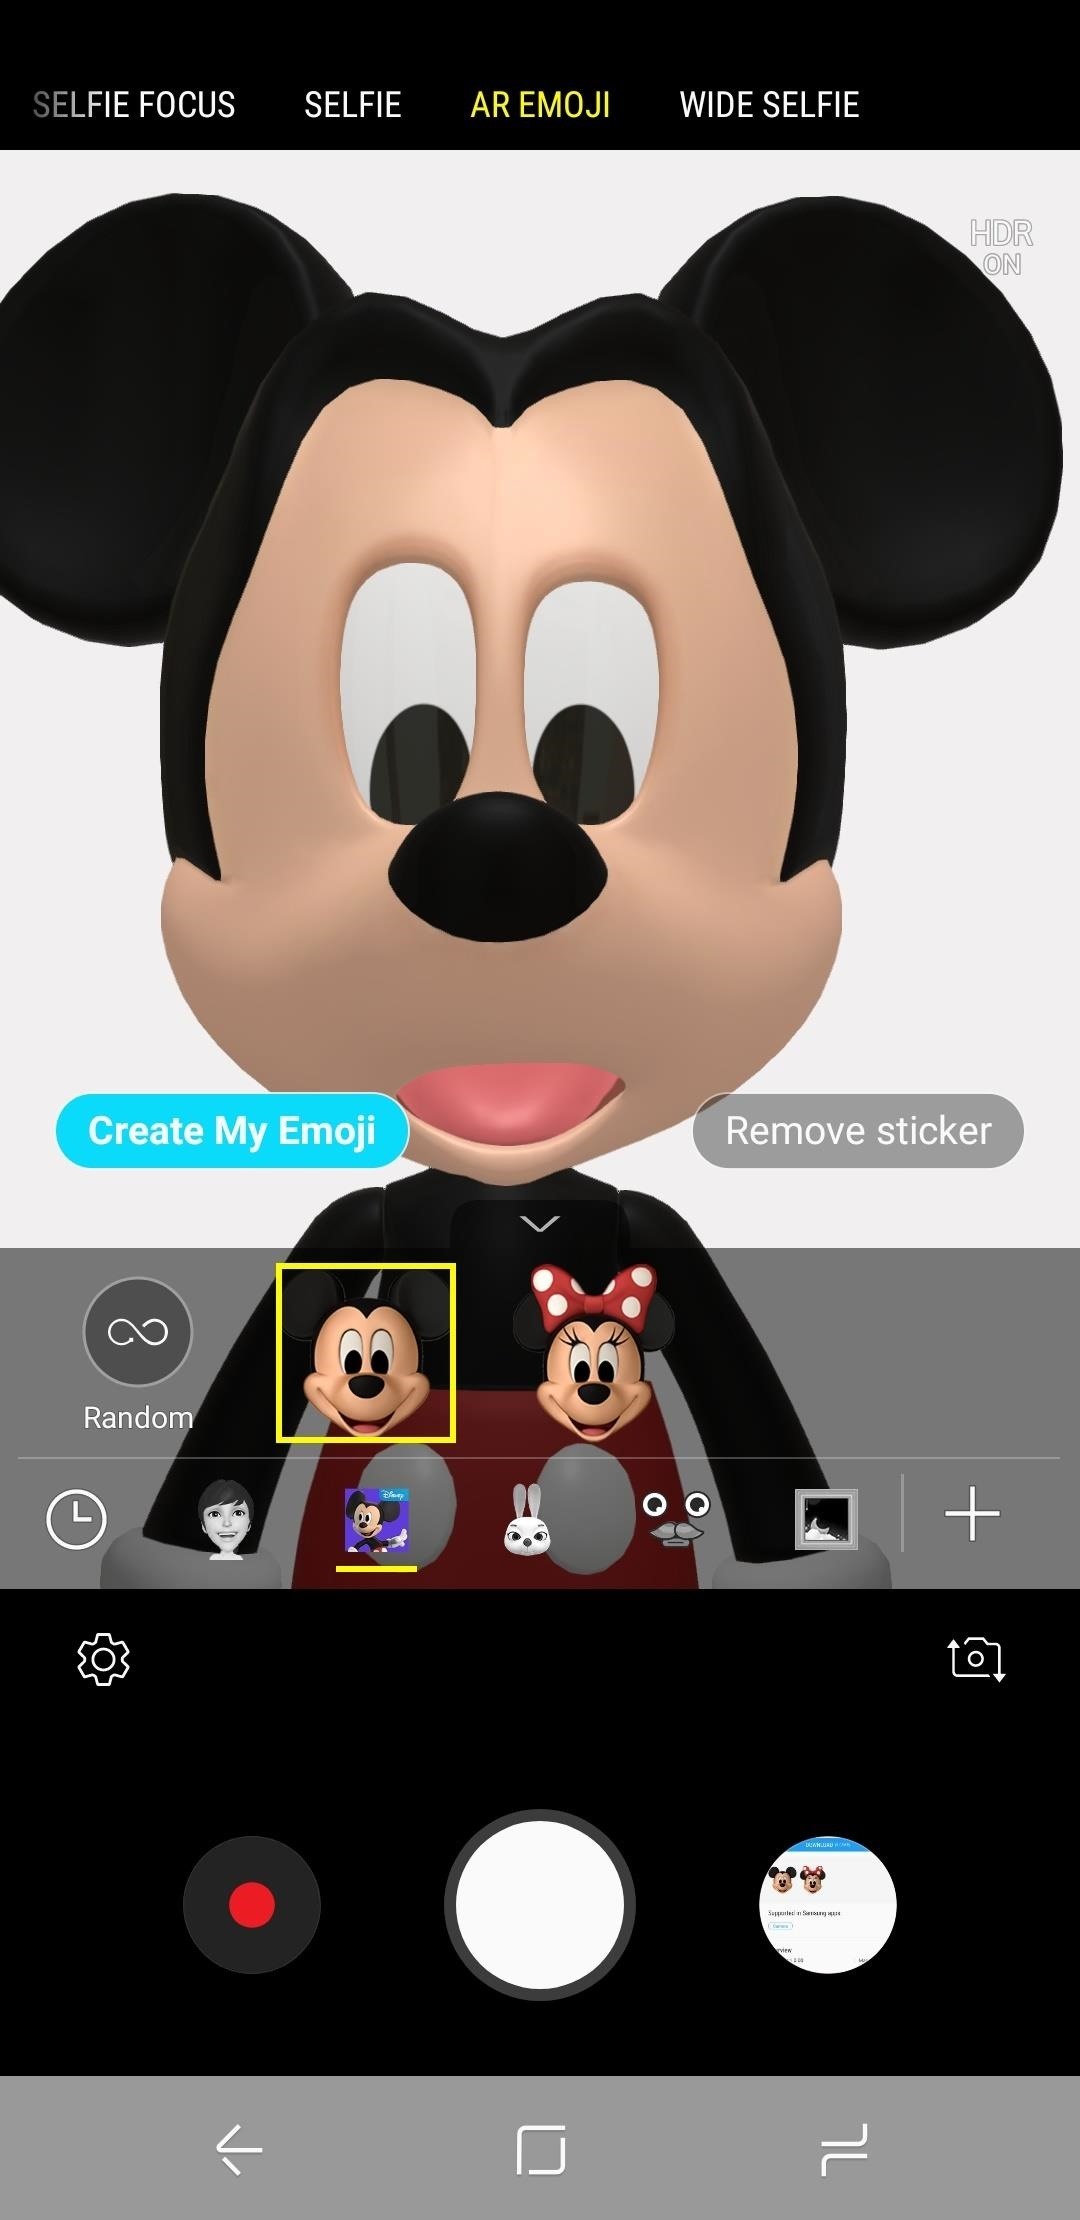 How to Add Mickey Mouse & Other Custom AR Emojis to Your Galaxy S9